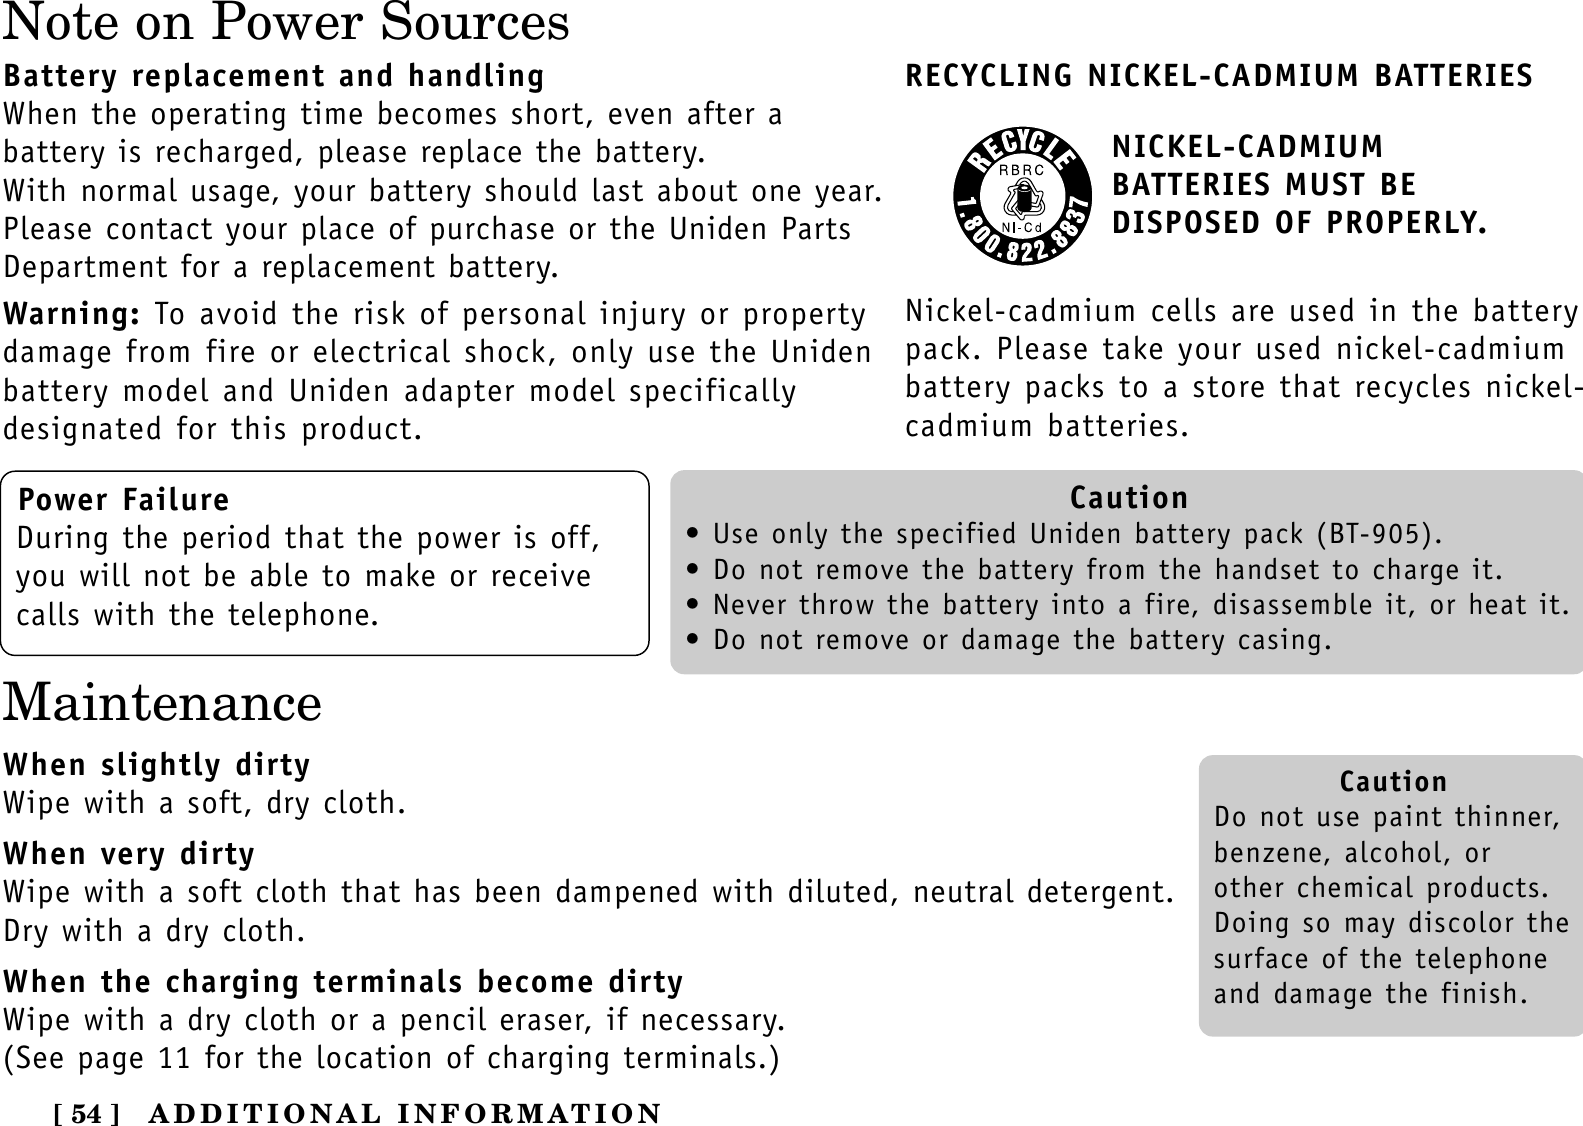 [ 54 ] ADDITIONAL INFORMATIONNote on Power SourcesBattery replacement and handlingWhen the operating time becomes short, even after a battery is recharged, please replace the battery.With normal usage, your battery should last about one year.Please contact your place of purchase or the Uniden PartsDepartment for a replacement battery.Warning: To avoid the risk of personal injury or propertydamage from fire or electrical shock, only use the Unidenbattery model and Uniden adapter model specifically designated for this product.RECYCLING NICKEL-CADMIUM BATTERIESNICKEL-CADMIUM BATTERIES MUST BE DISPOSED OF PROPERLY.Nickel-cadmium cells are used in the batterypack. Please take your used nickel-cadmiumbattery packs to a store that recycles nickel-cadmium batteries.Power FailureDuring the period that the power is off,you will not be able to make or receivecalls with the telephone.Caution• Use only the specified Uniden battery pack (BT-905).• Do not remove the battery from the handset to charge it.• Never throw the battery into a fire, disassemble it, or heat it.• Do not remove or damage the battery casing.CautionDo not use paint thinner,benzene, alcohol, orother chemical products. Doing so may discolor thesurface of the telephoneand damage the finish.MaintenanceWhen slightly dirtyWipe with a soft, dry cloth.When very dirtyWipe with a soft cloth that has been dampened with diluted, neutral detergent.Dry with a dry cloth.When the charging terminals become dirtyWipe with a dry cloth or a pencil eraser, if necessary.(See page 11 for the location of charging terminals.)